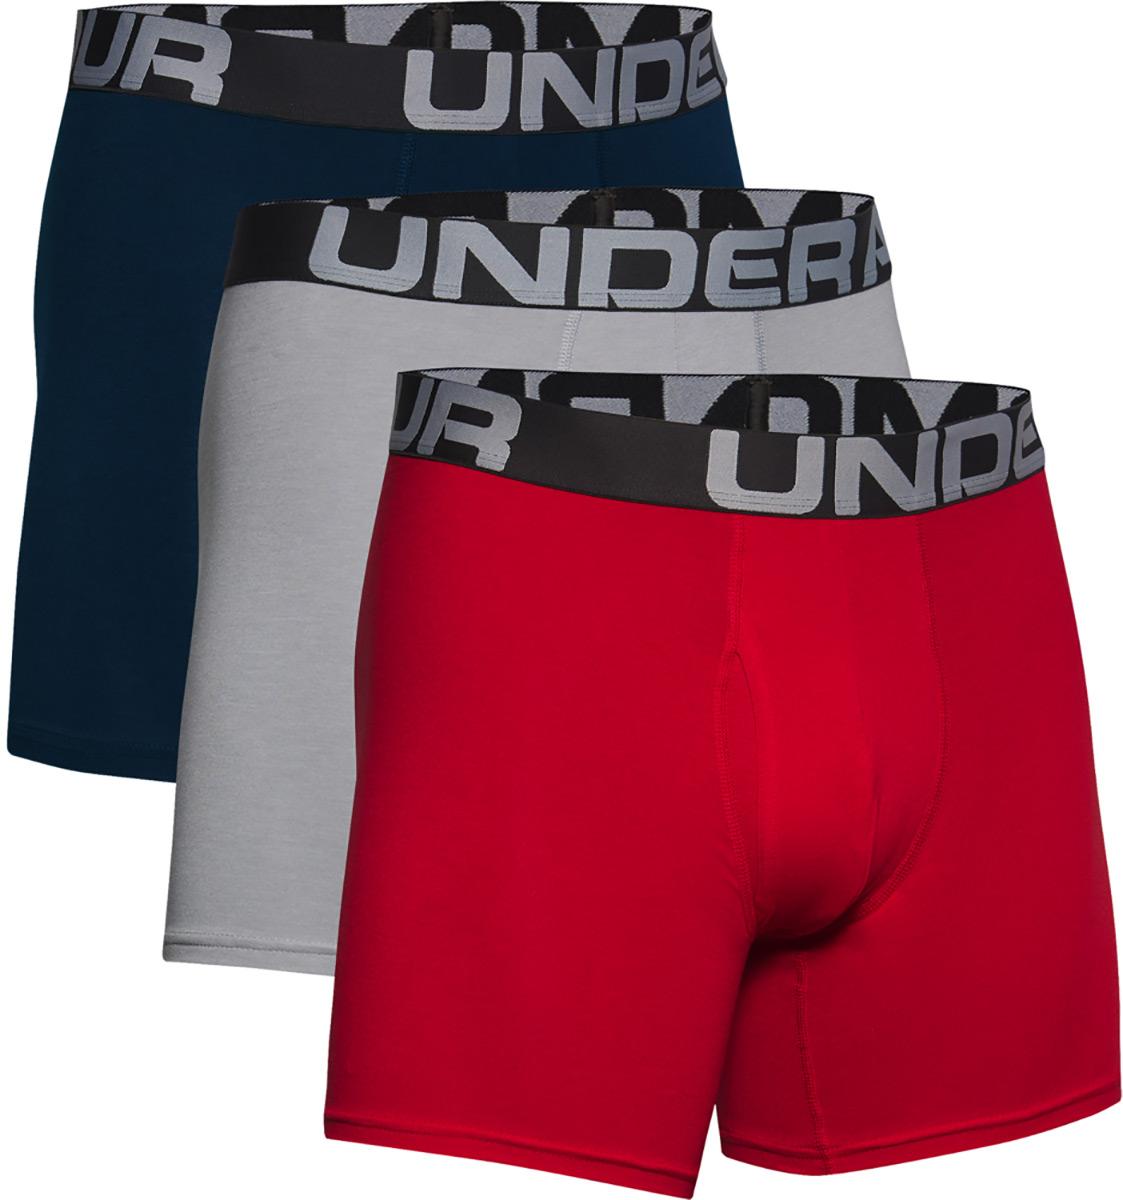 Under Armour Charged Cotton 6 Boxer 3 Pack - Red/academy/mod Gray Medium Heather